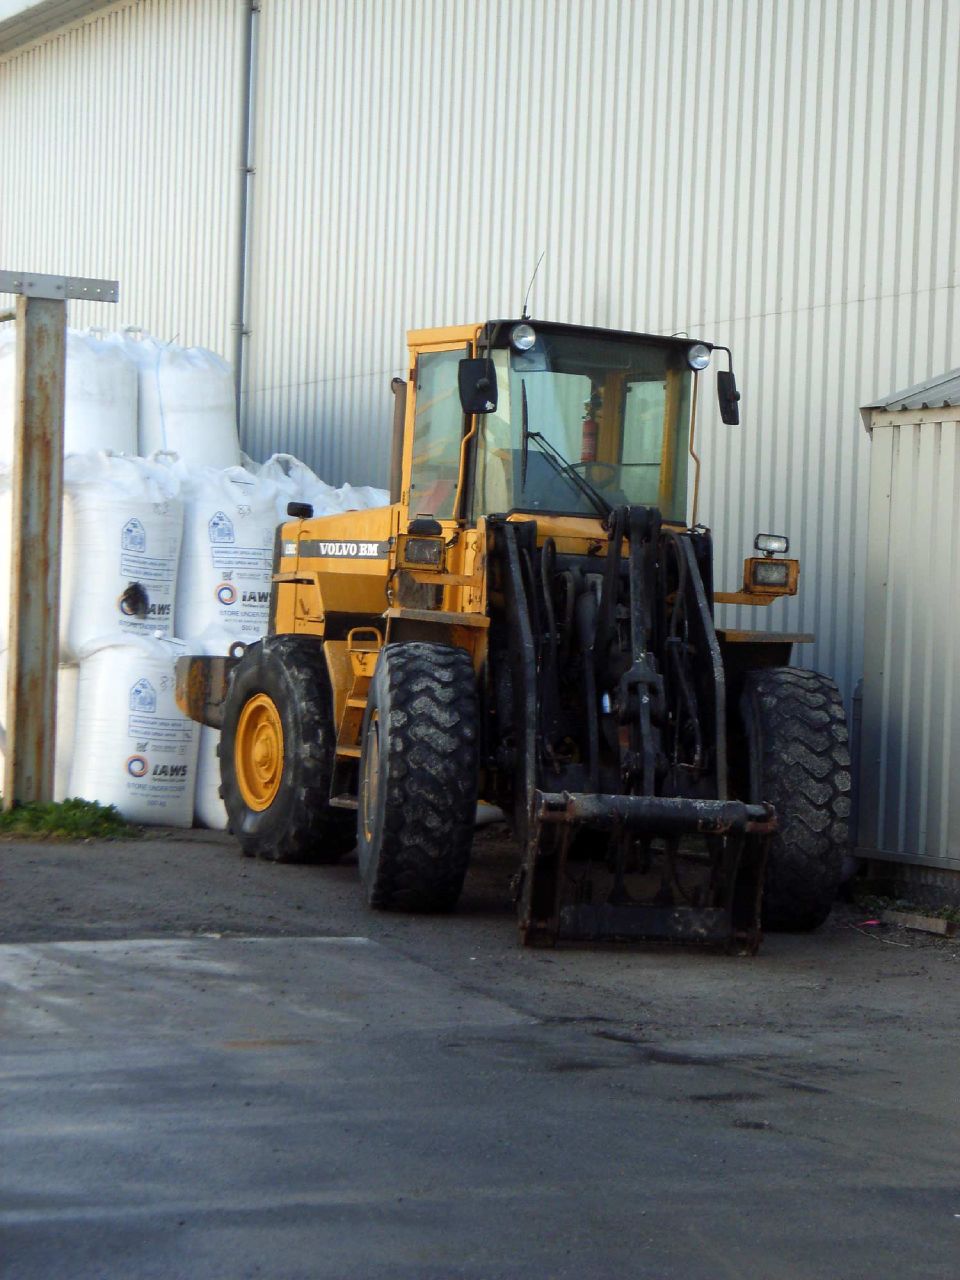 a construction vehicle in front of a warehouse